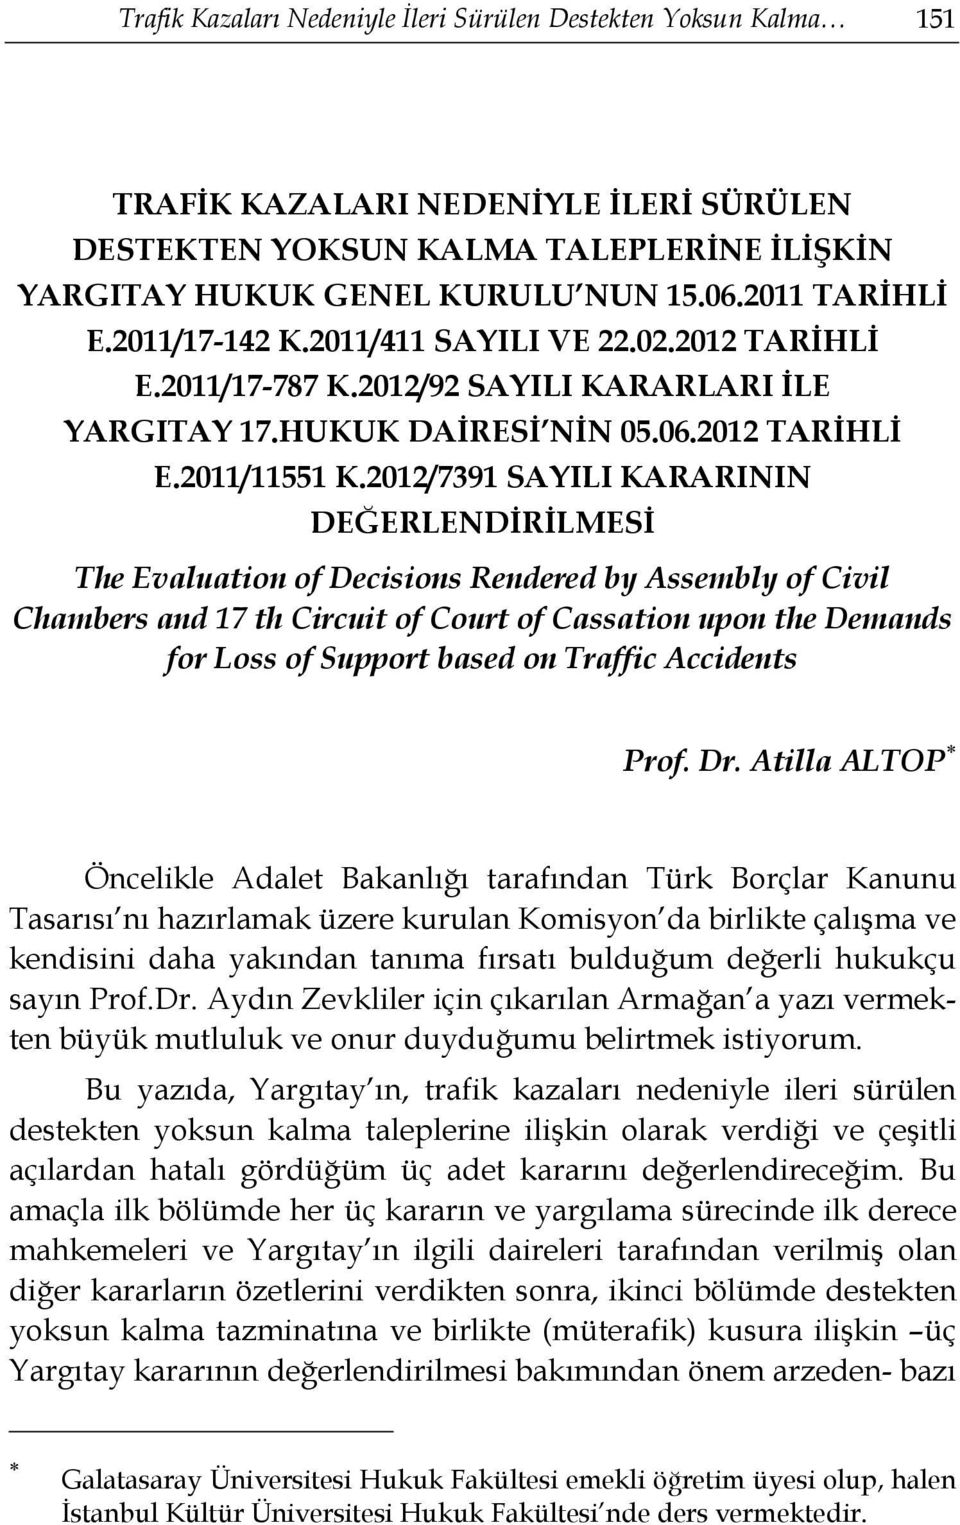 2012/7391 SAYILI KARARININ DEĞERLENDİRİLMESİ The Evaluation of Decisions Rendered by Assembly of Civil Chambers and 17 th Circuit of Court of Cassation upon the Demands for Loss of Support based on